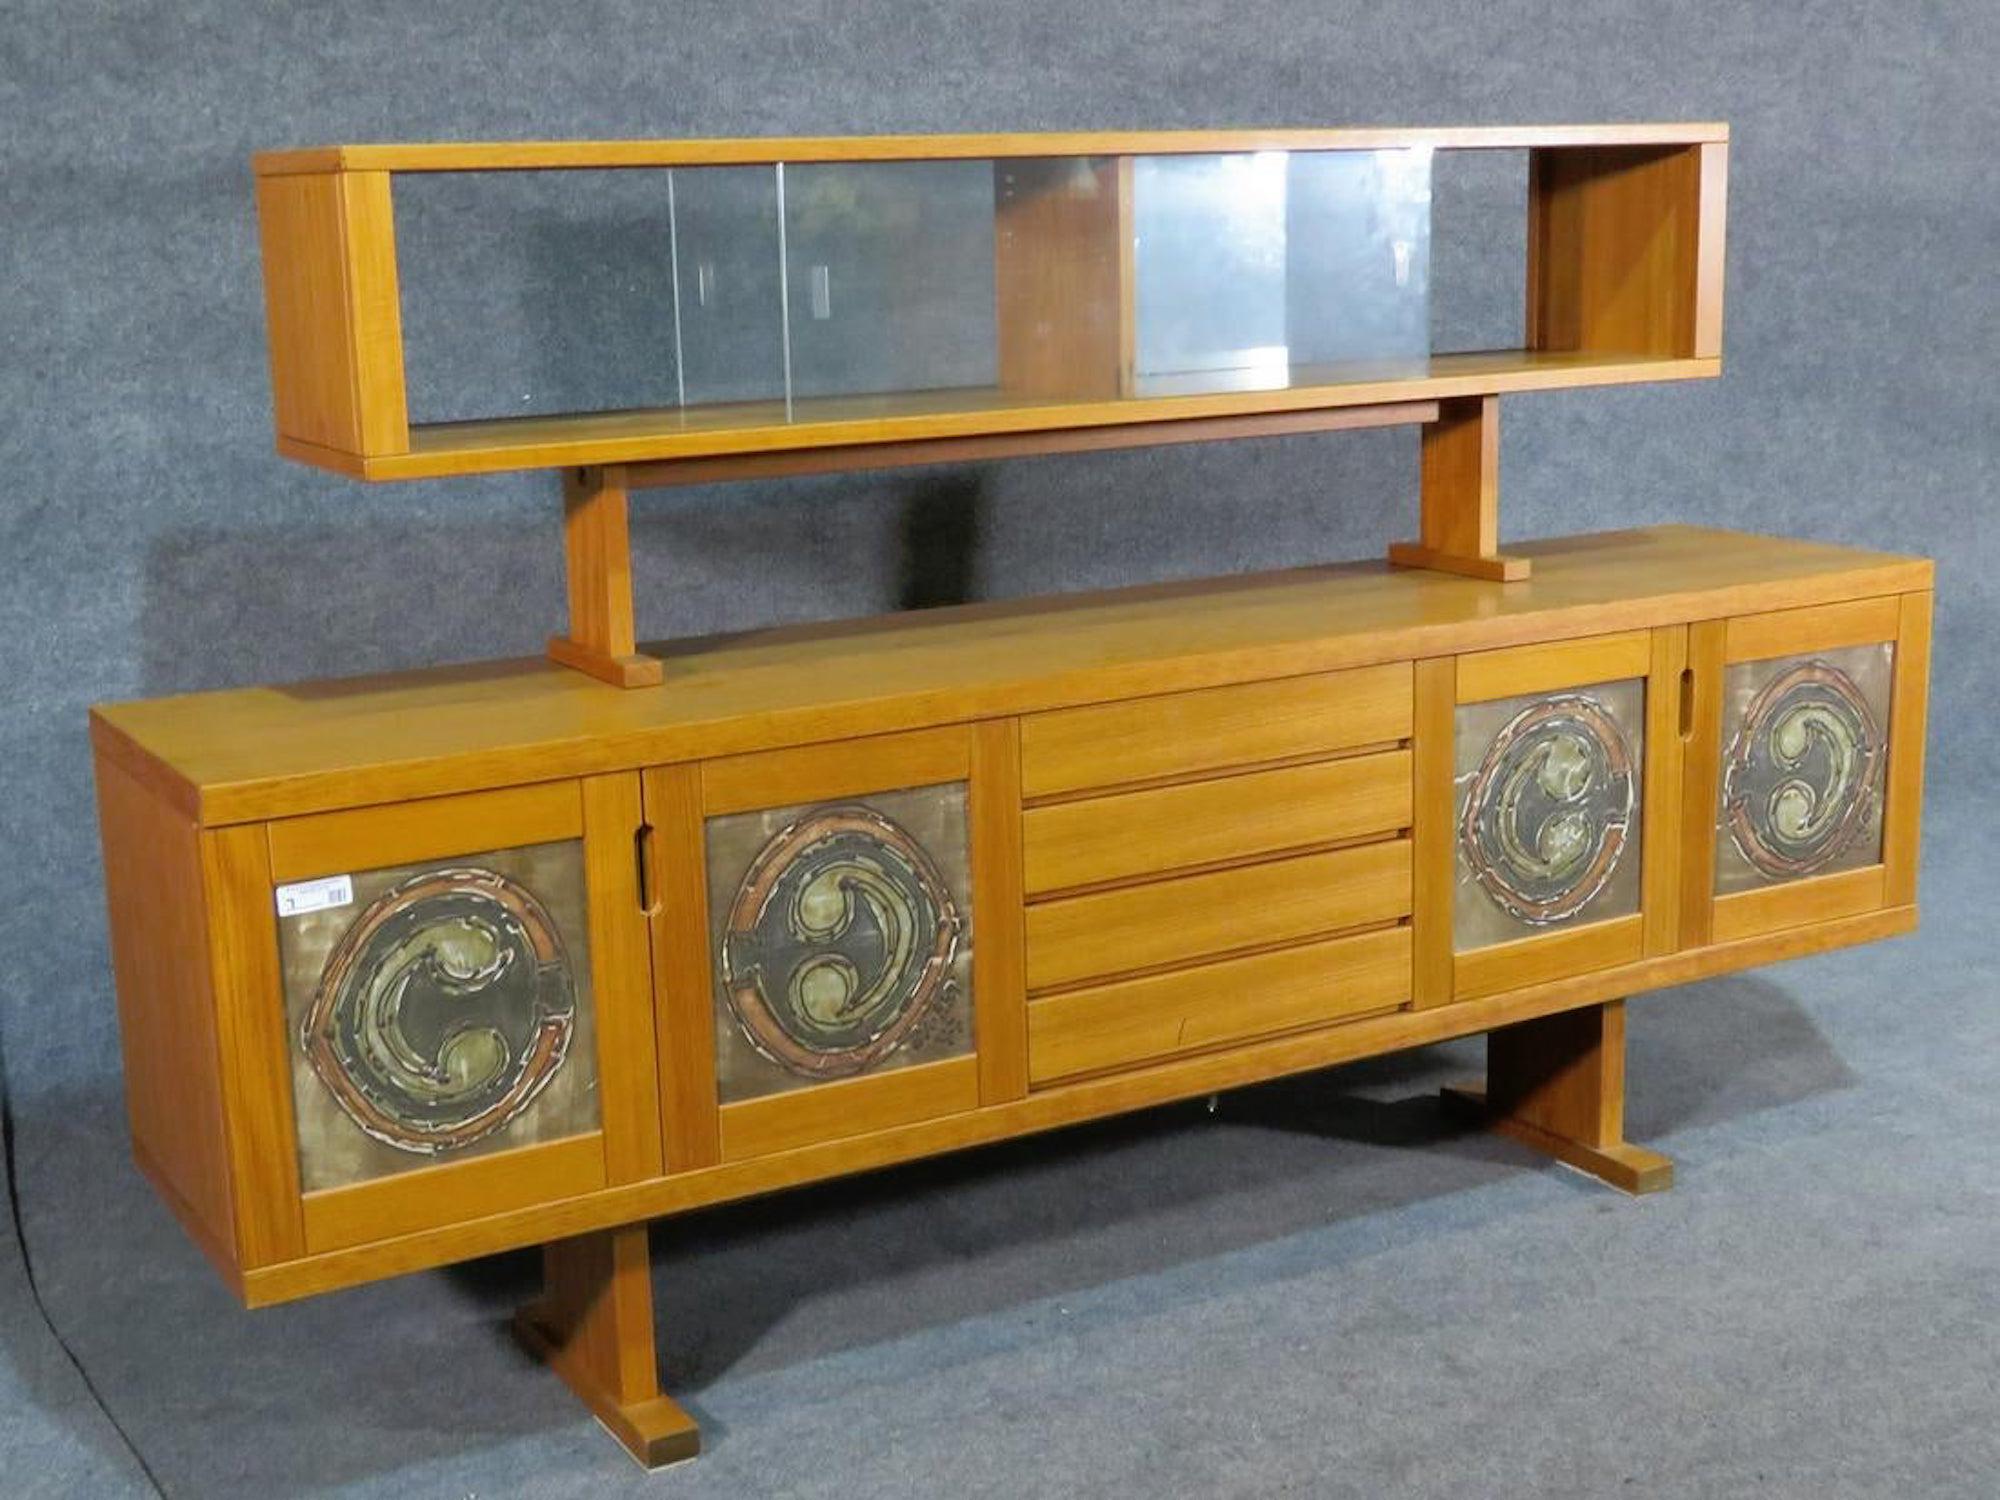 Danish Midcentury Credenza with Tile In Good Condition For Sale In Brooklyn, NY